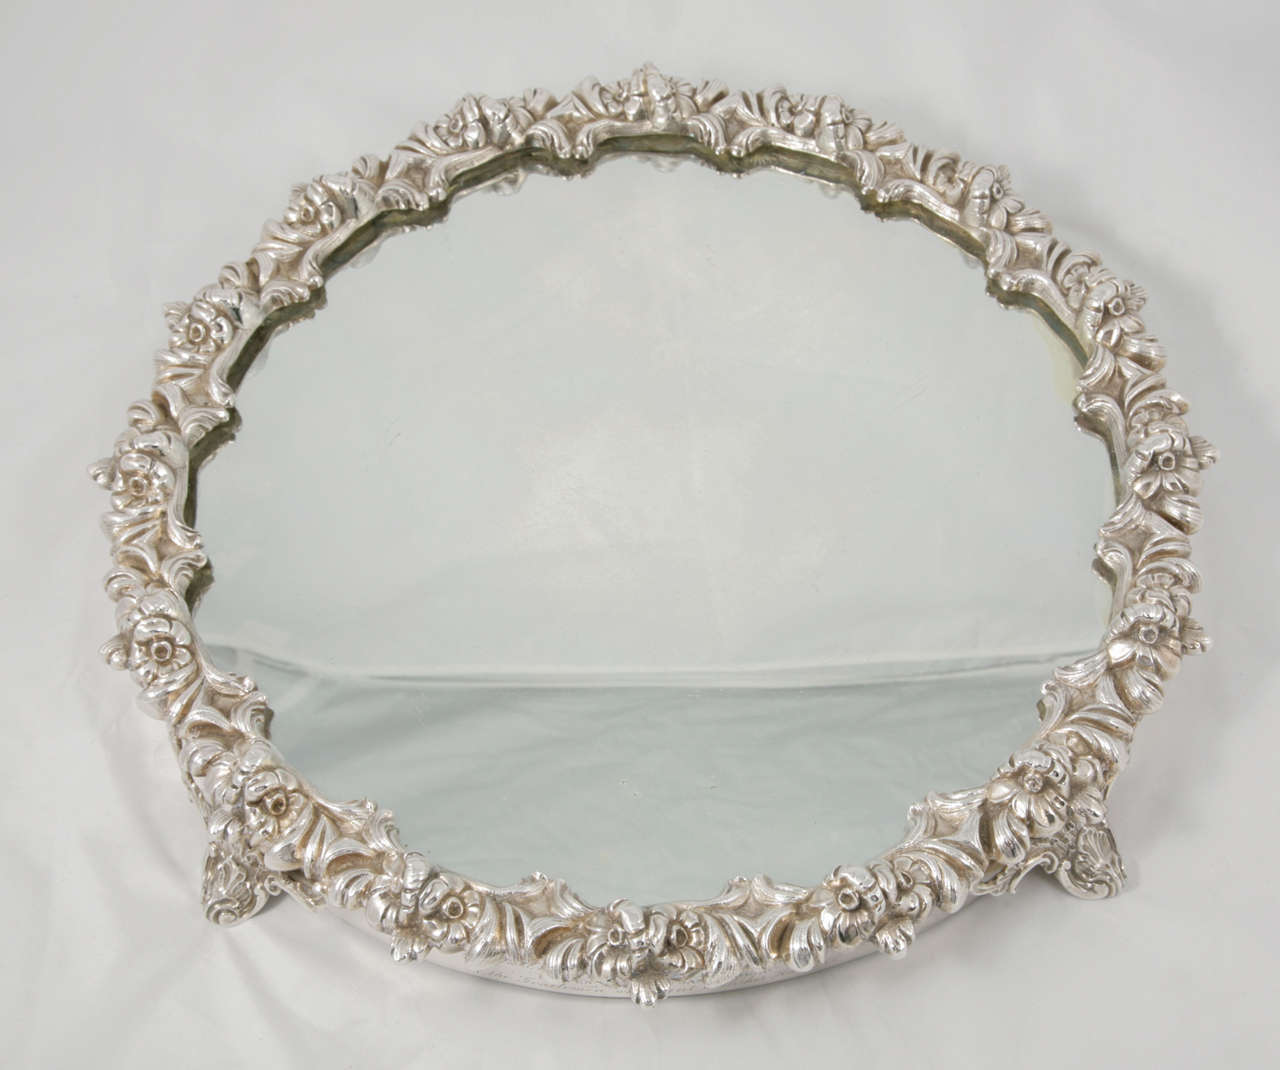 Silver and glass Victorian plateau, circa 1850. Beautiful and ornate, this can be used as a centrepiece for any dining table or as a display for crystal decanters and glasses.

Please contact us for shipping costs.